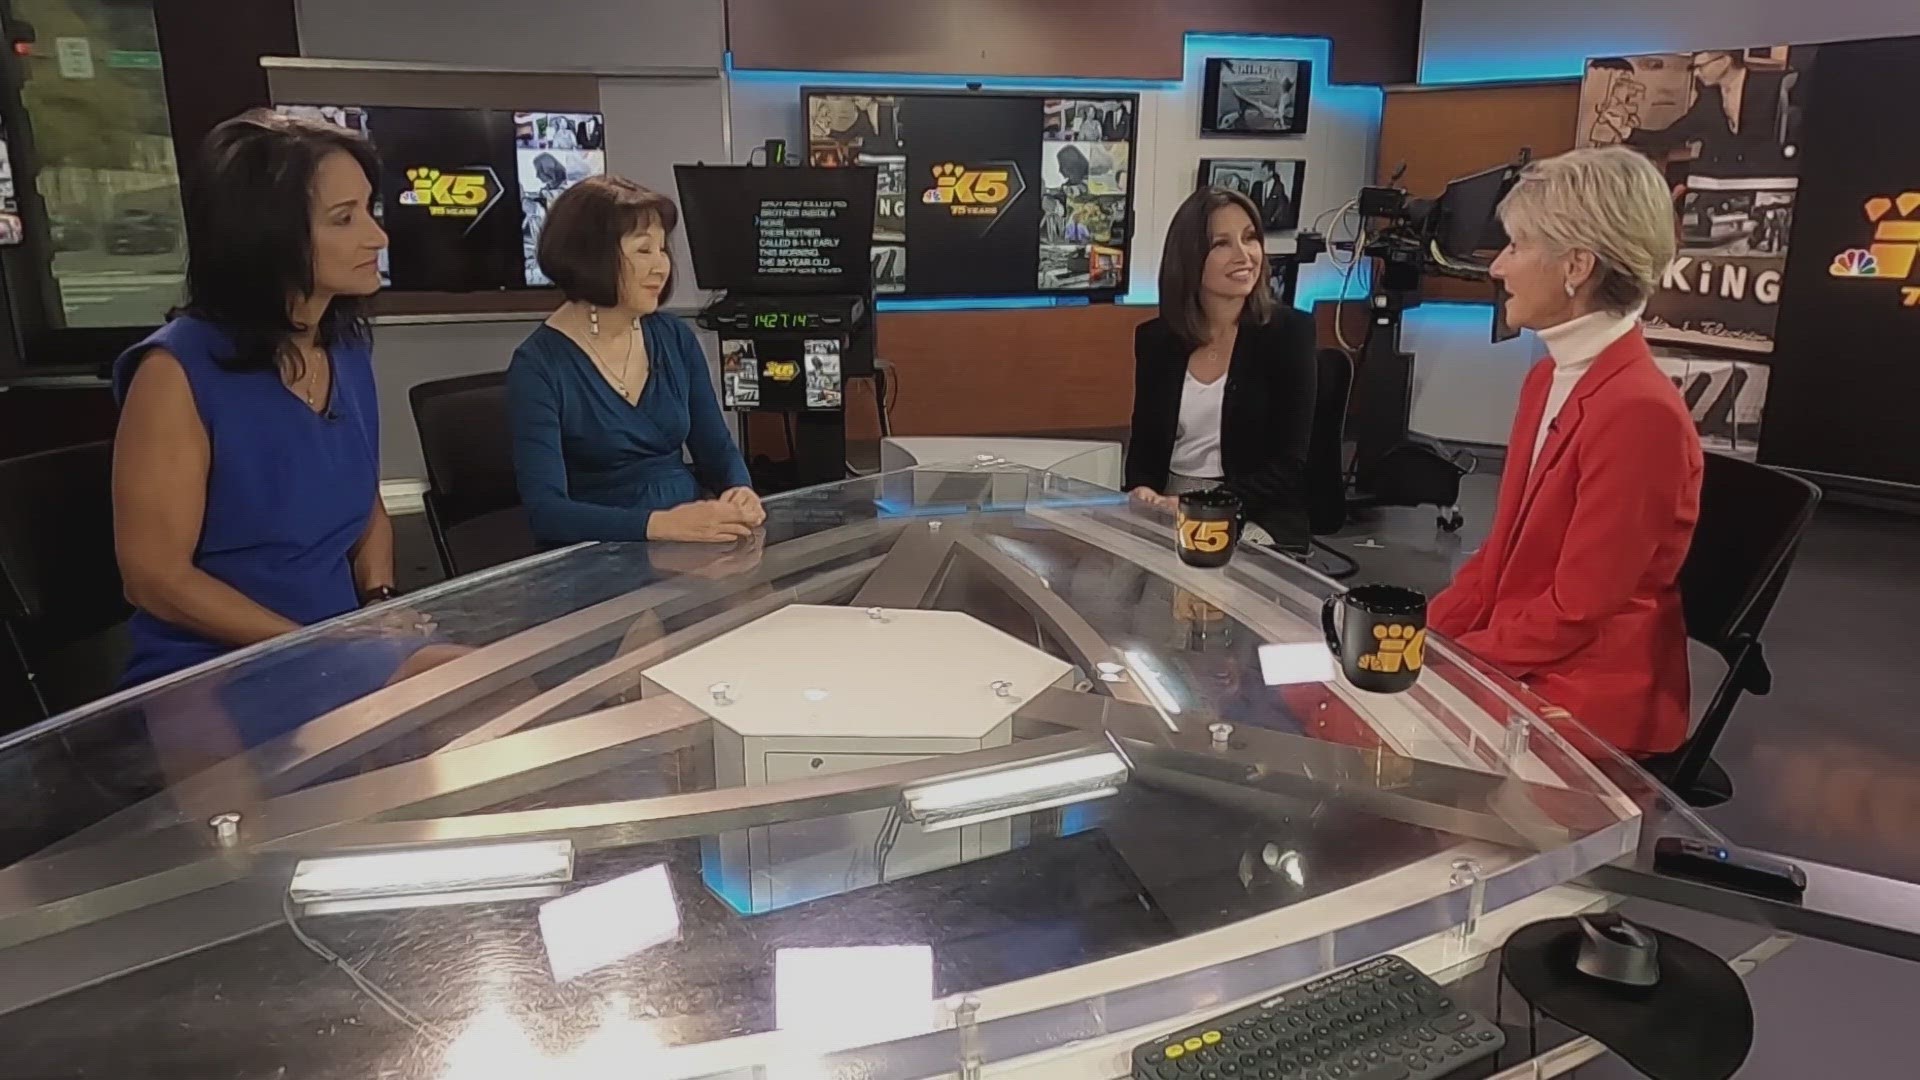 Longtime KING 5 viewers probably know the names Jean Enersen, Lori Matsukawa and Joyce Taylor. They have decades of journalism experience and have broken barriers.